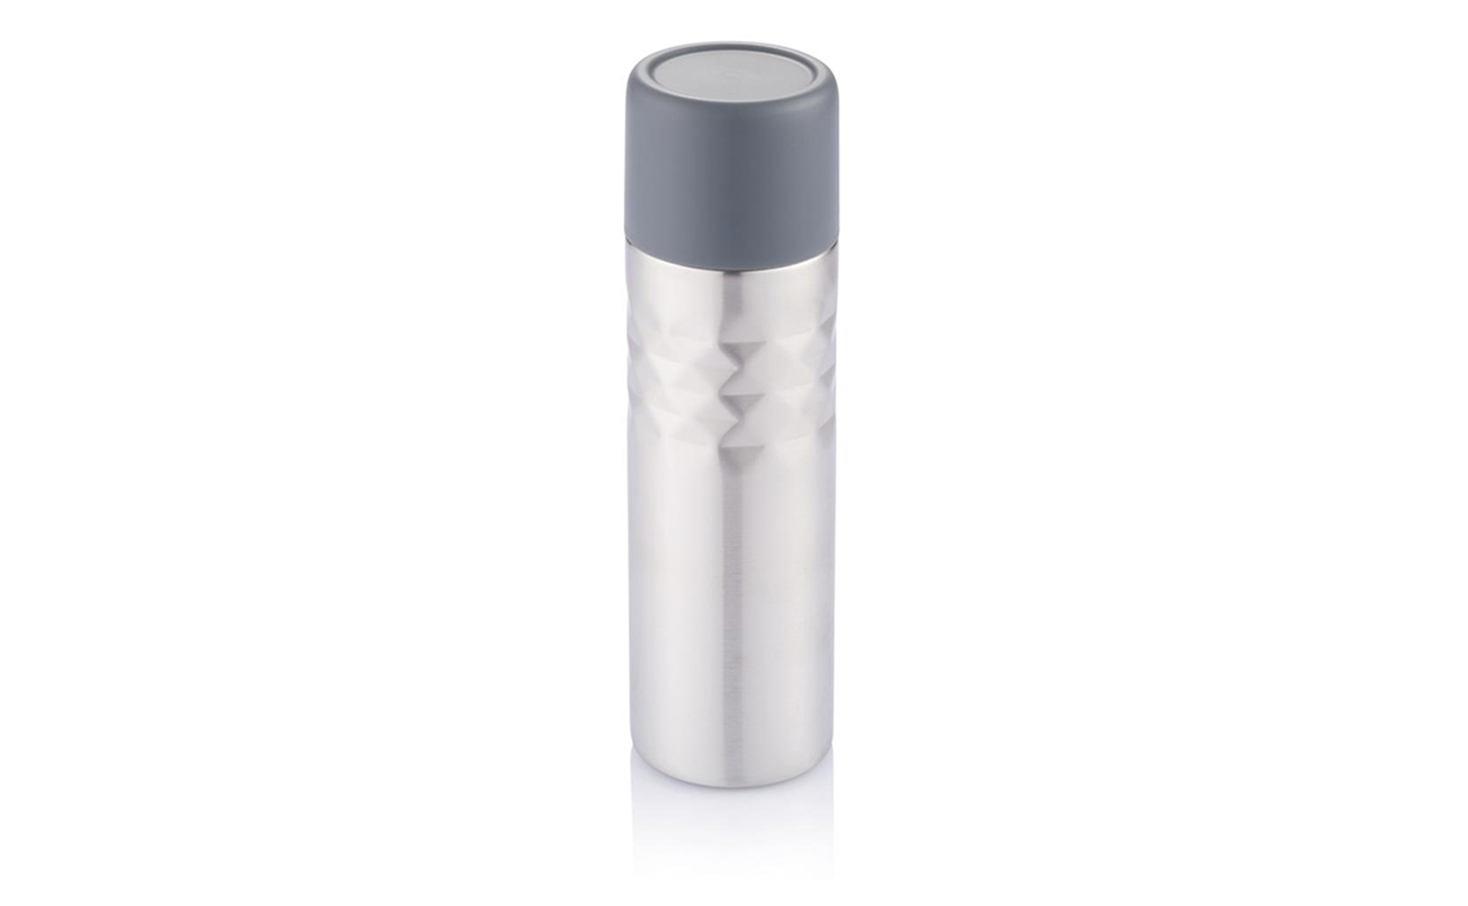 MOSA Flask – XDDESIGN 500 ml stainless steel Flask Silver